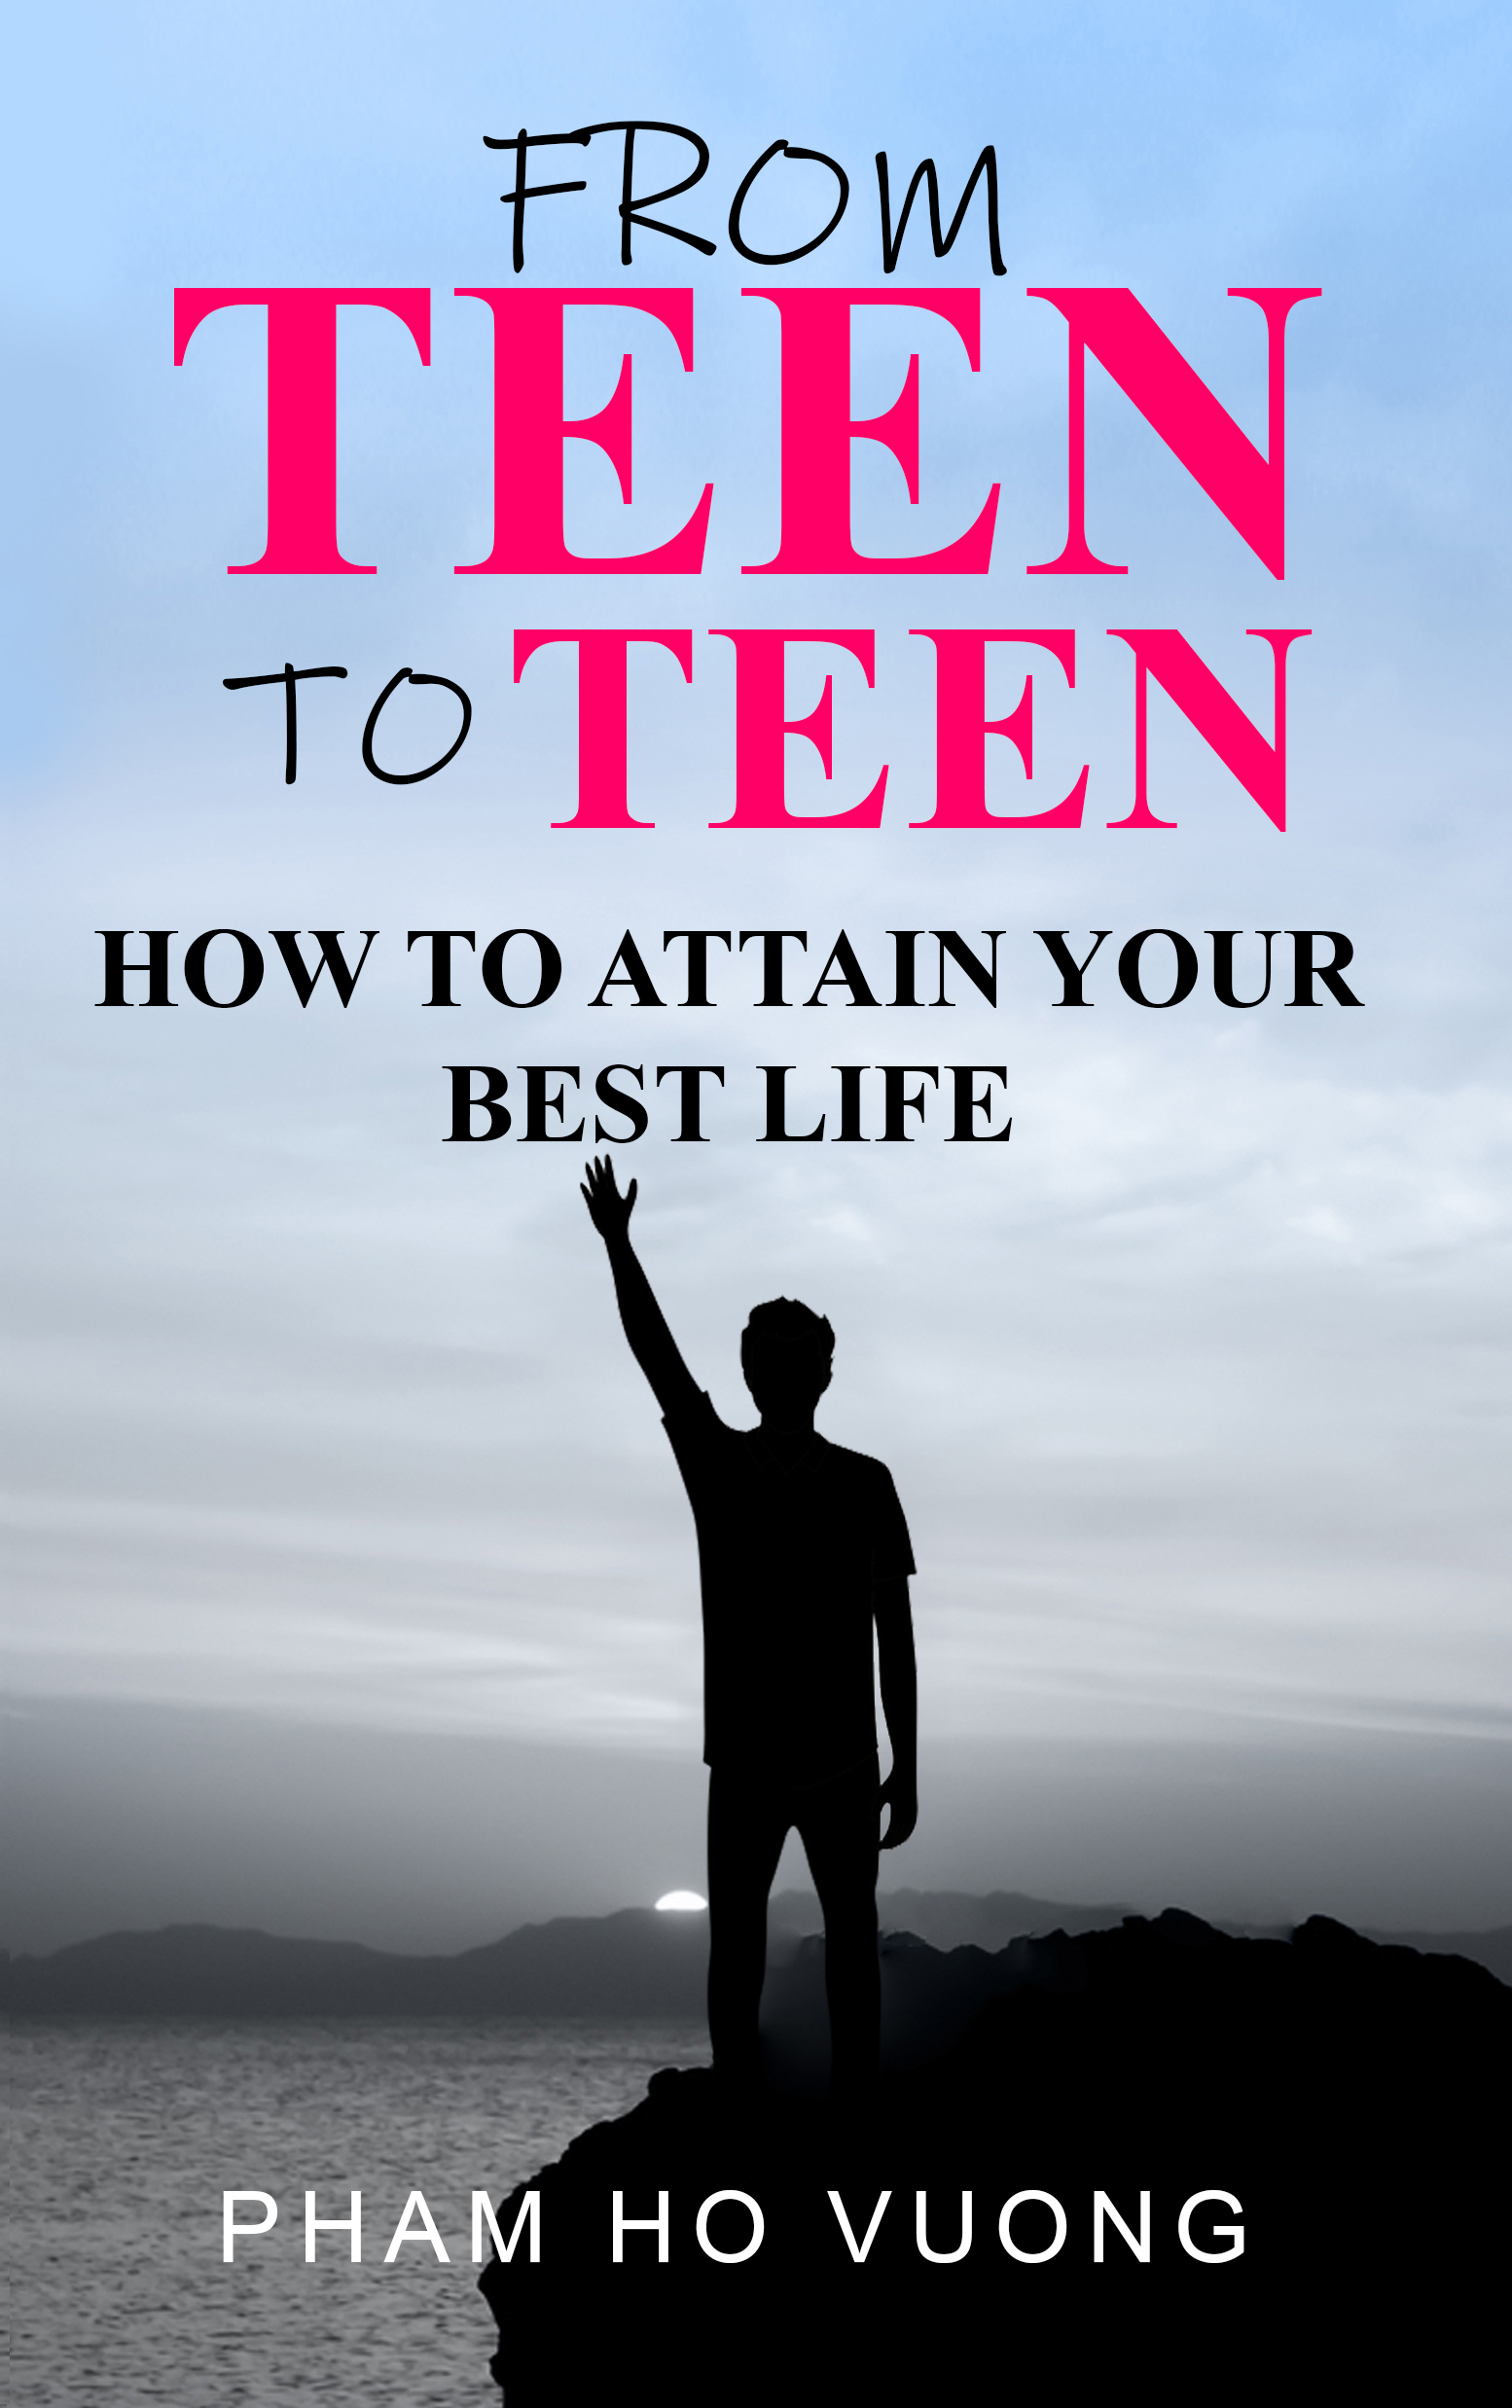 FREE: From teen to teen: How to attain your best life by Vuong Pham